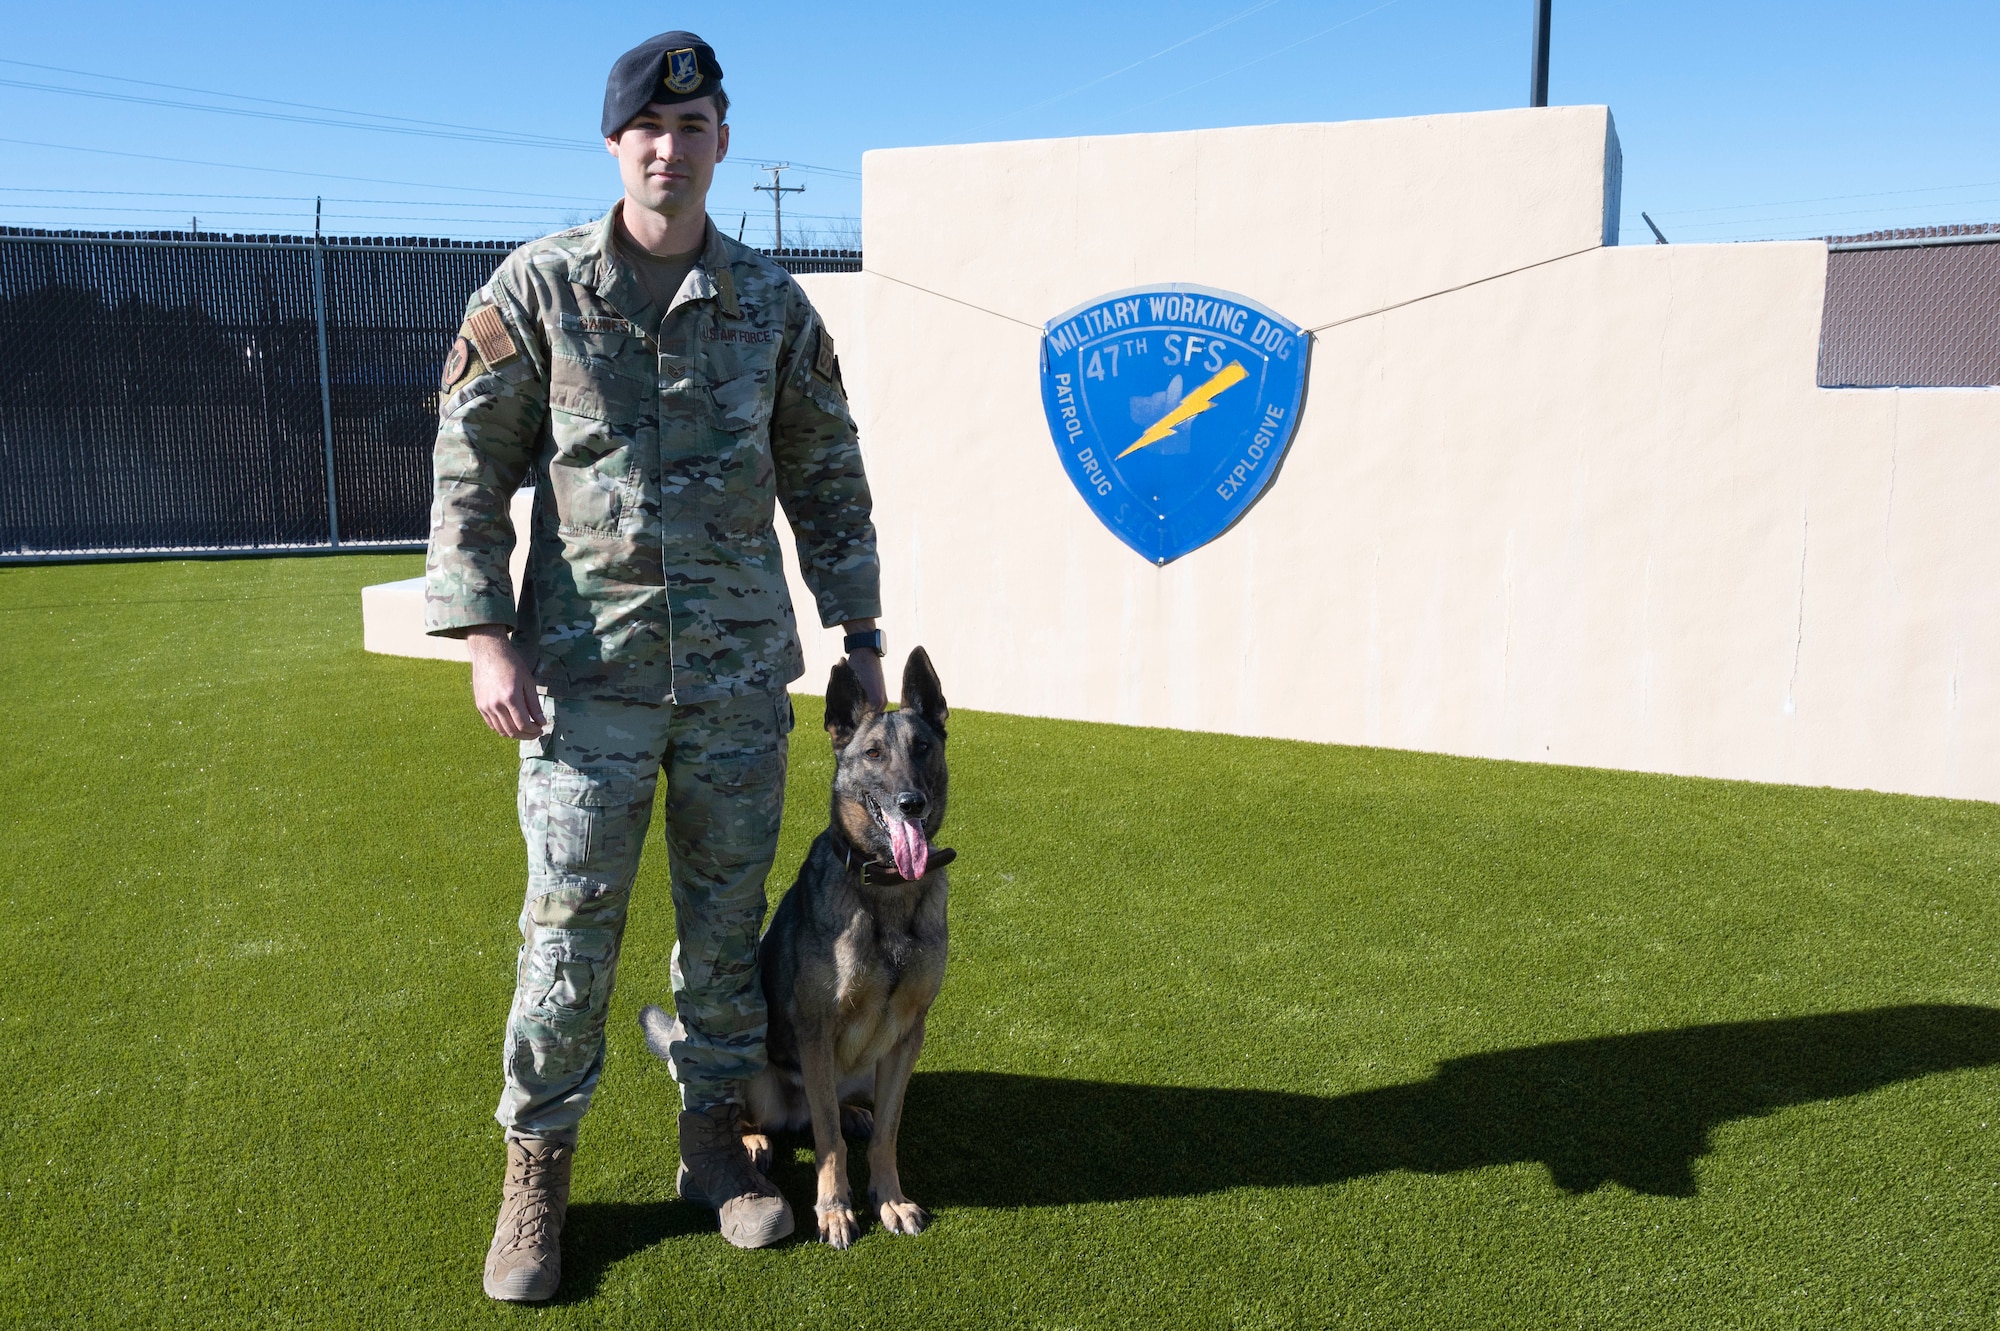 U.S. Air Force Staff Sgt. Charles Gaines, 47th Security Force Squadron military working dog trainer, poses with Tuko, a military working dog, at the 47th Security Forces Squadron military working dog training area at Laughlin Air Force Base, Texas, on Jan. 13, 2023. MWD handlers employ their dogs to conduct vehicle searches, and searches of open areas, buildings, and other locations for the detection of suspects, explosives or illegal drugs. (U.S. Air Force photo by Airman 1st Class Kailee Reynolds)